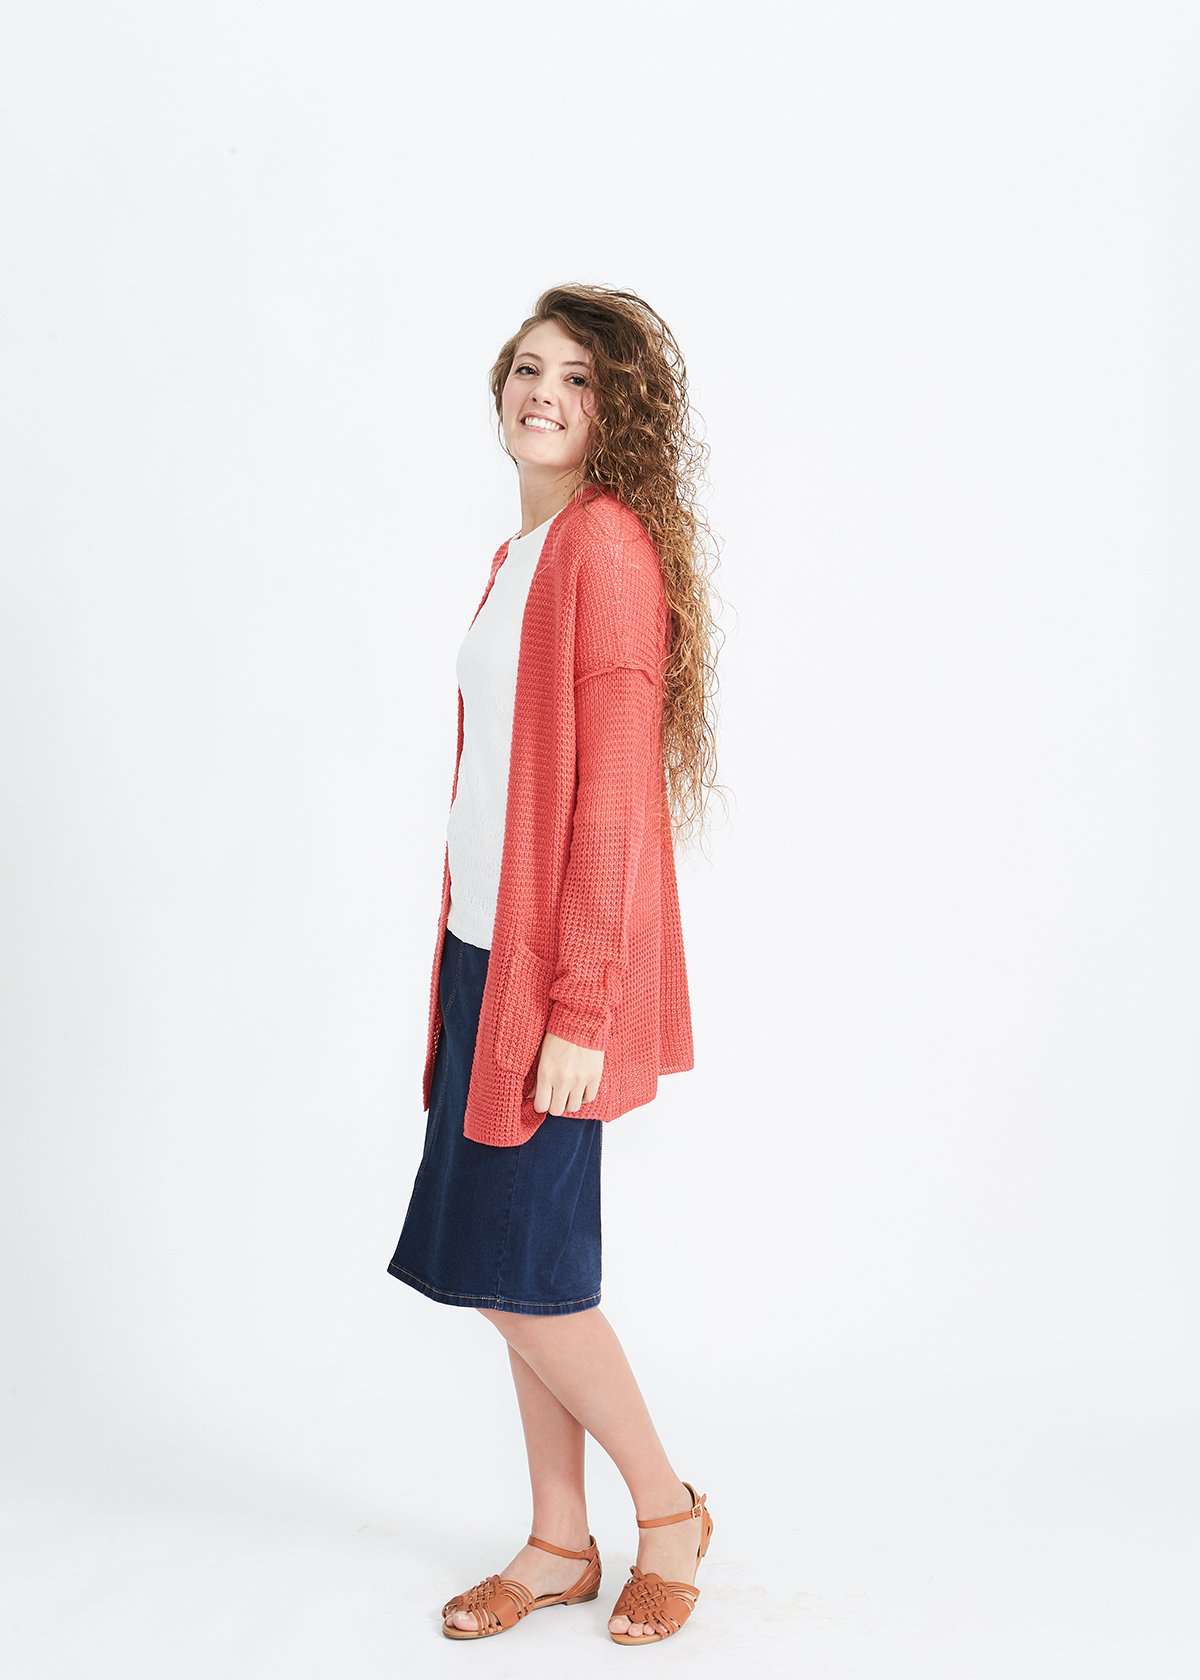 Woman wearing a green or coral waffle knit cardigan